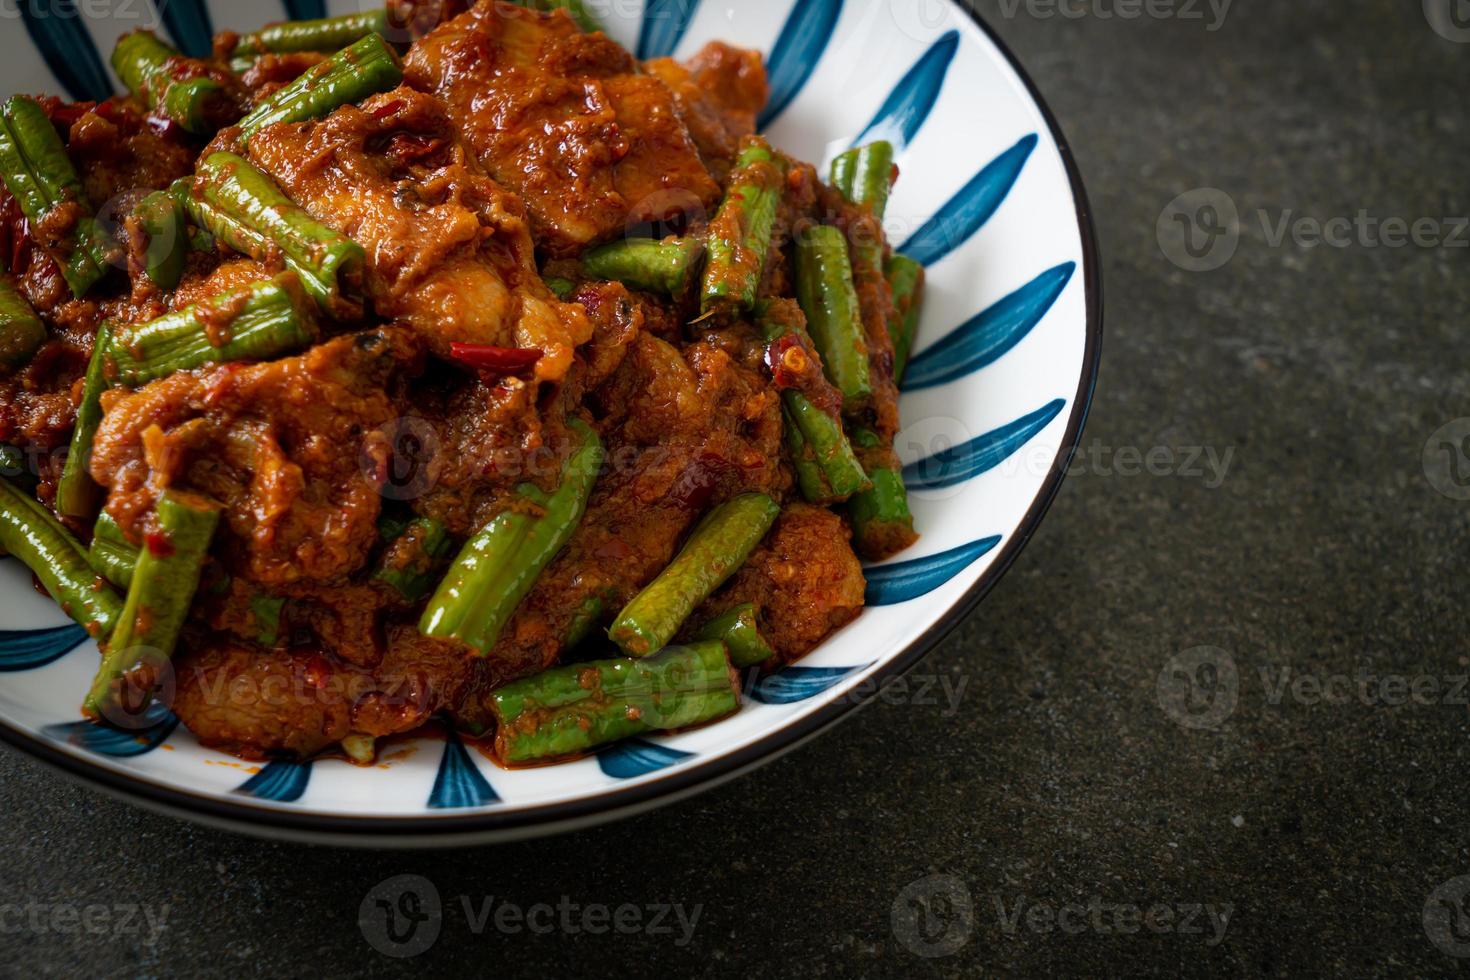 Stir fried pork with red curry paste photo